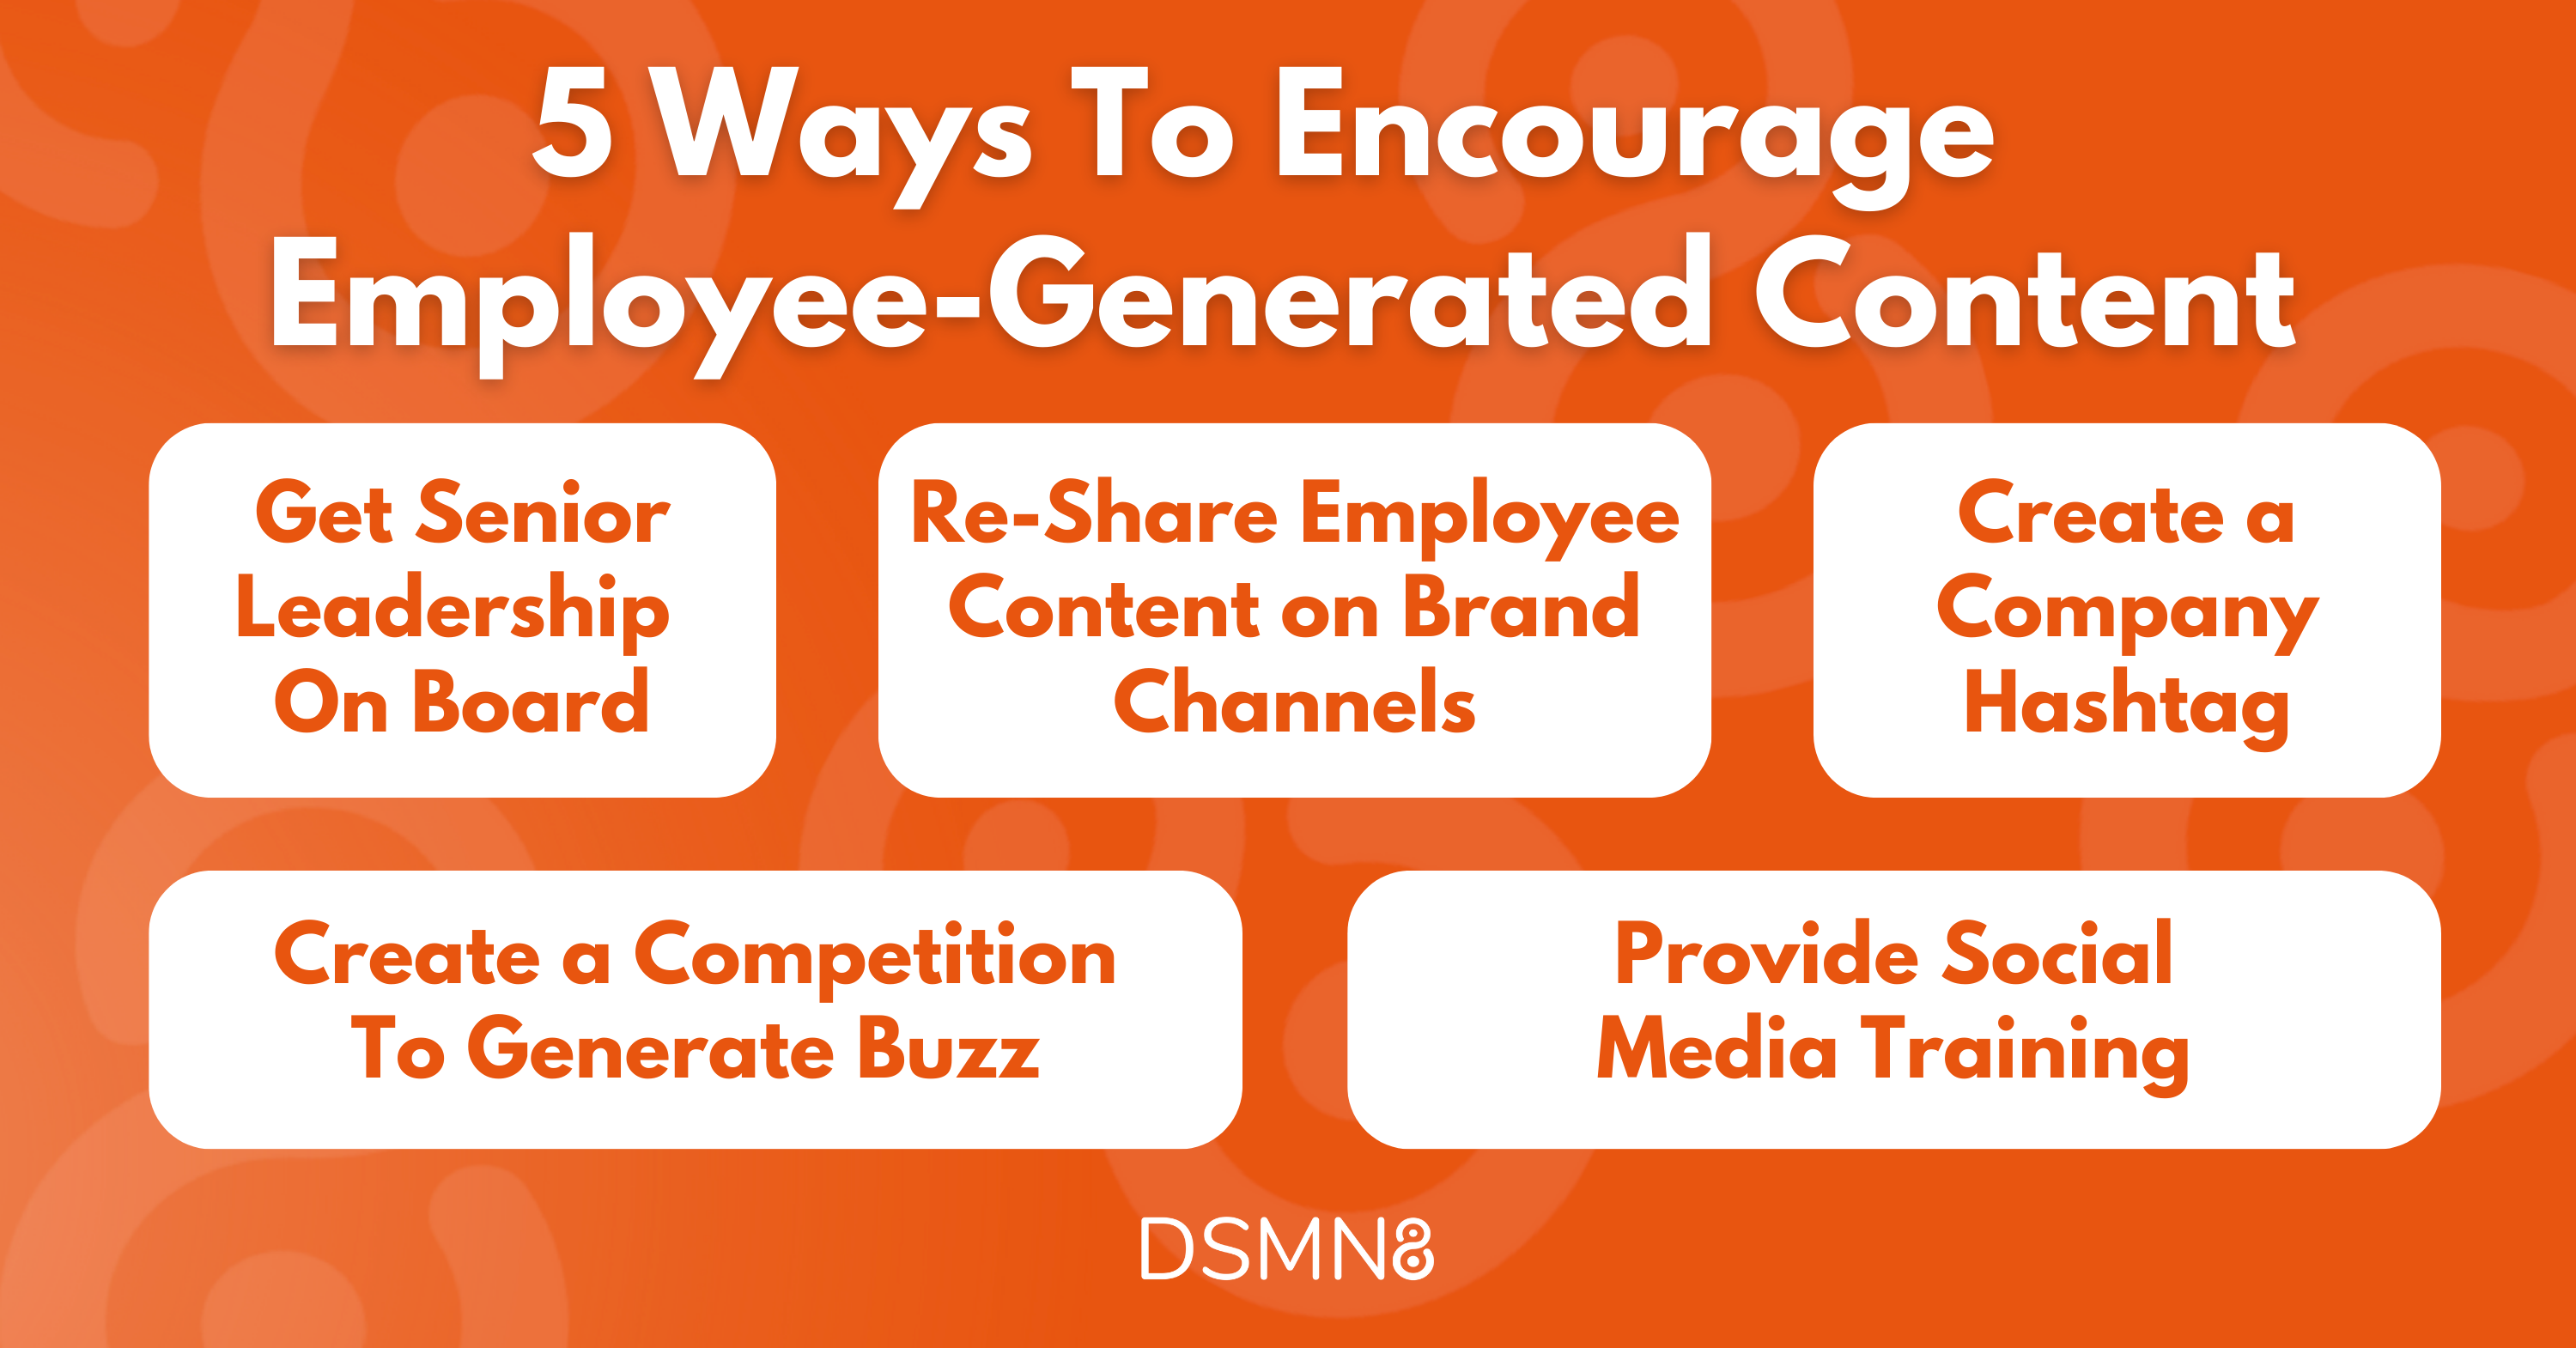 How to repurpose employee-generated content - Clinch